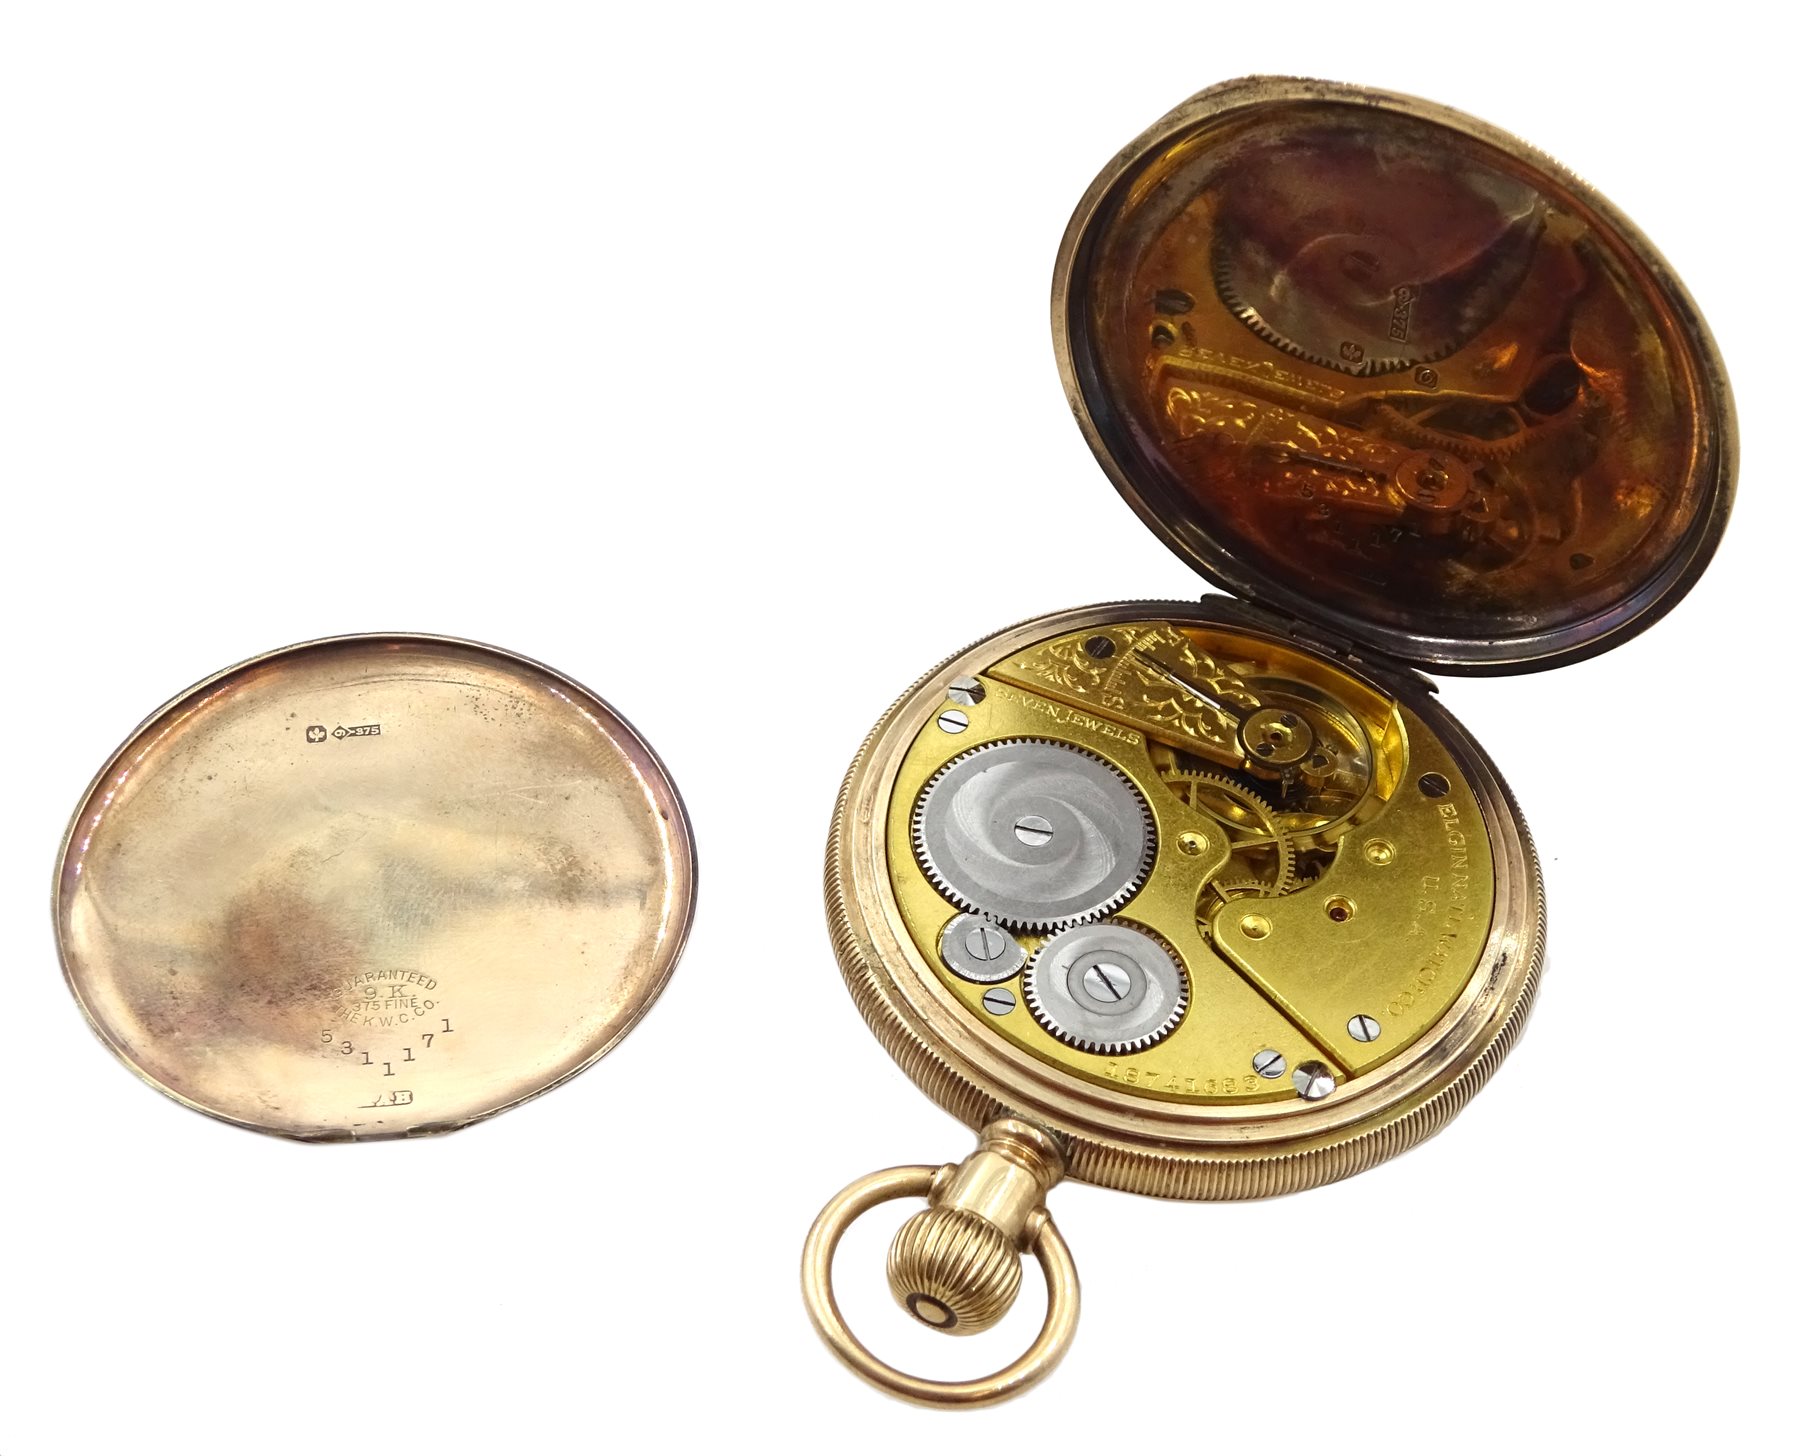 Elgin early 20th century 9ct gold full hunter pocket watch top wound, No. 18741683, case by Keysone - Image 5 of 5